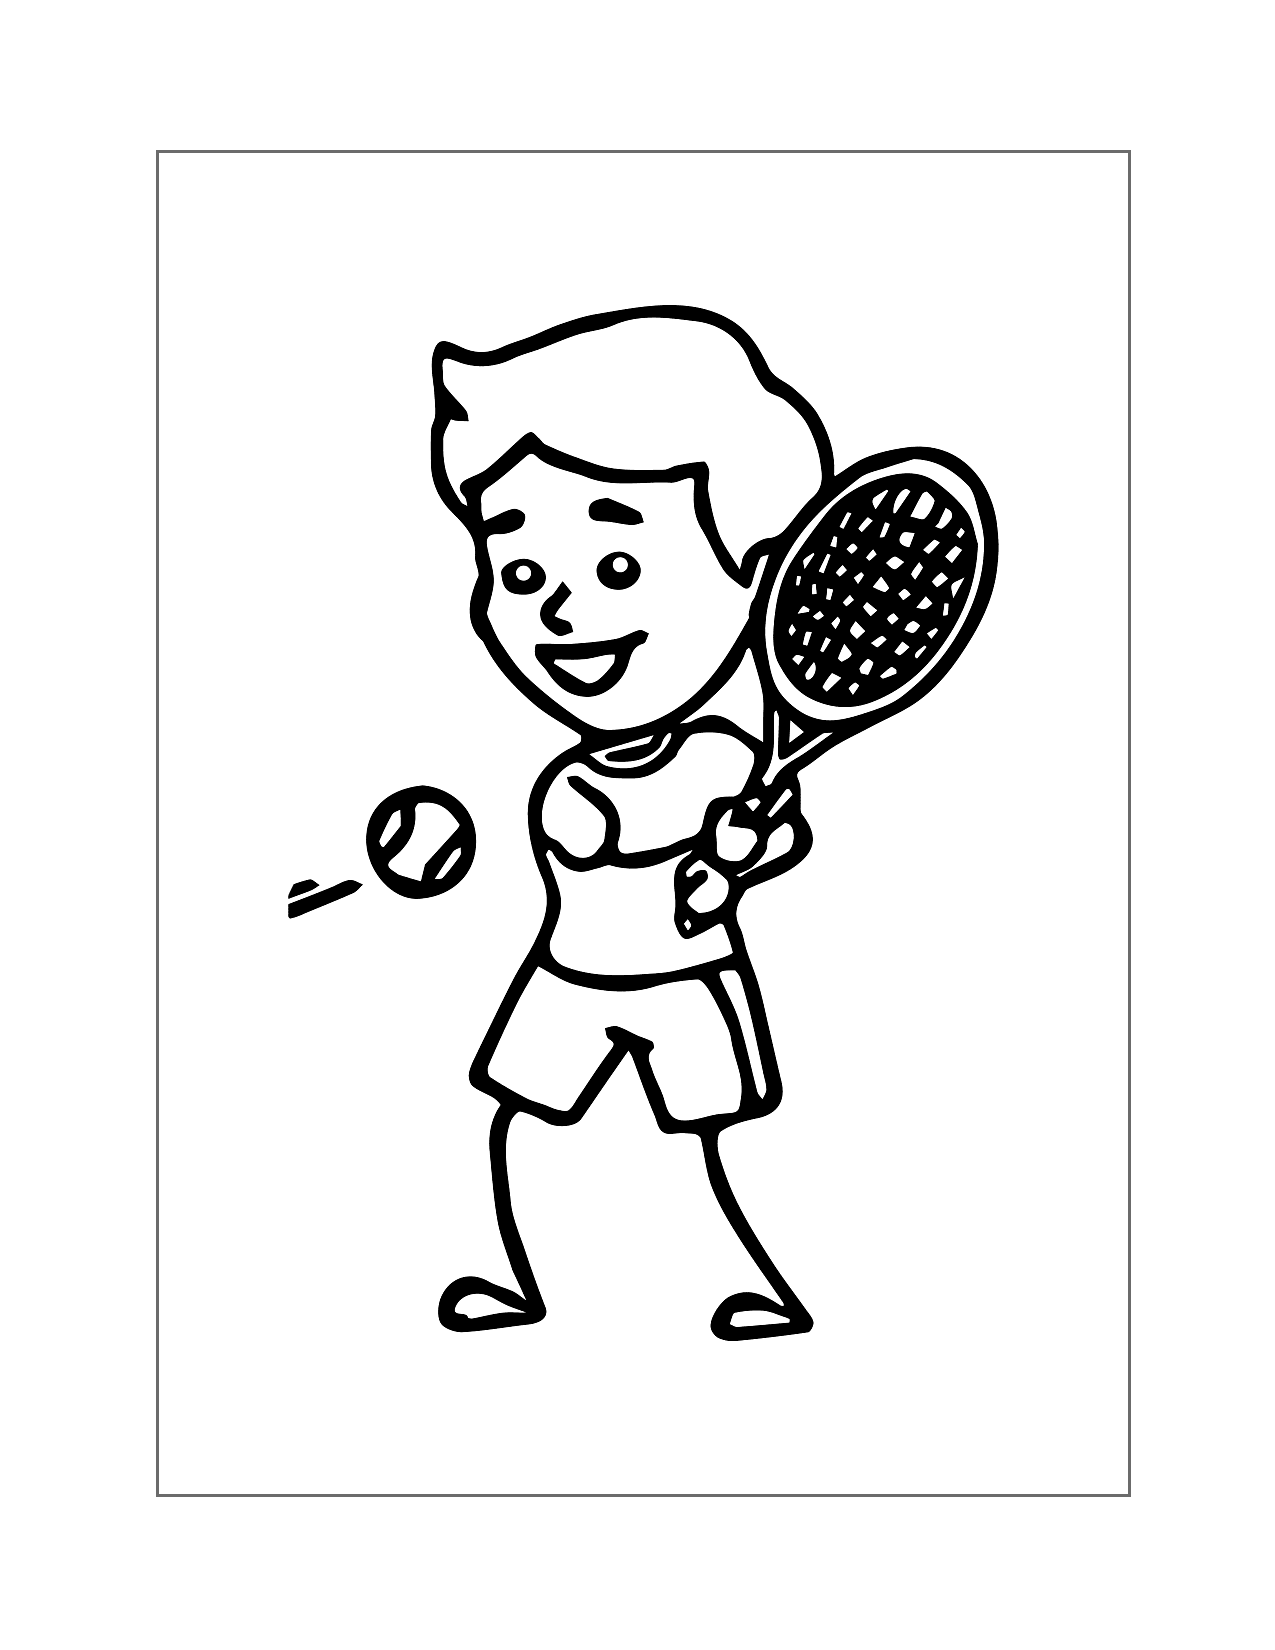 Stick Boy Playing Tennis Coloring Page